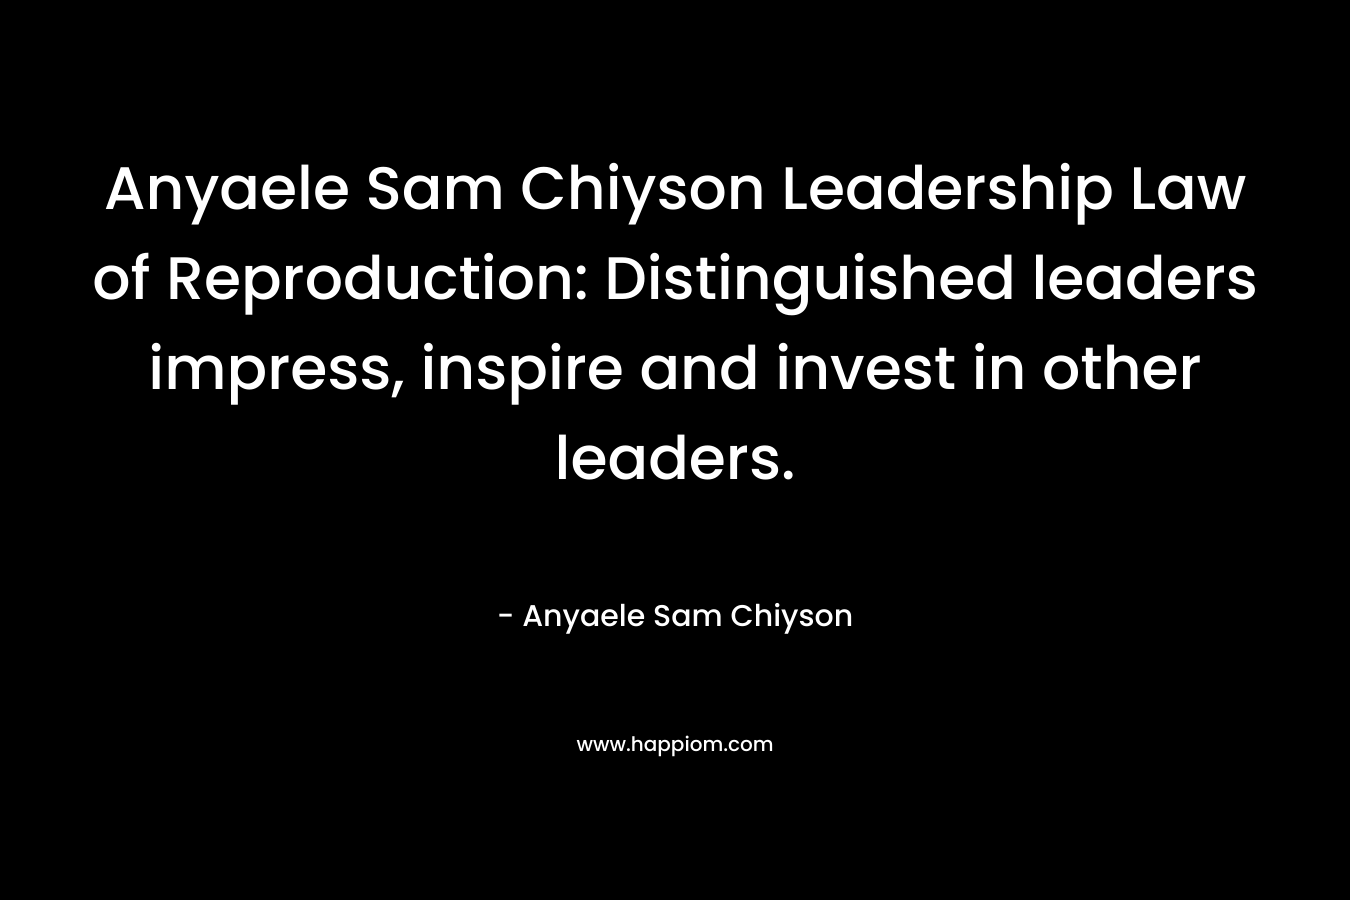 Anyaele Sam Chiyson Leadership Law of Reproduction: Distinguished leaders impress, inspire and invest in other leaders.